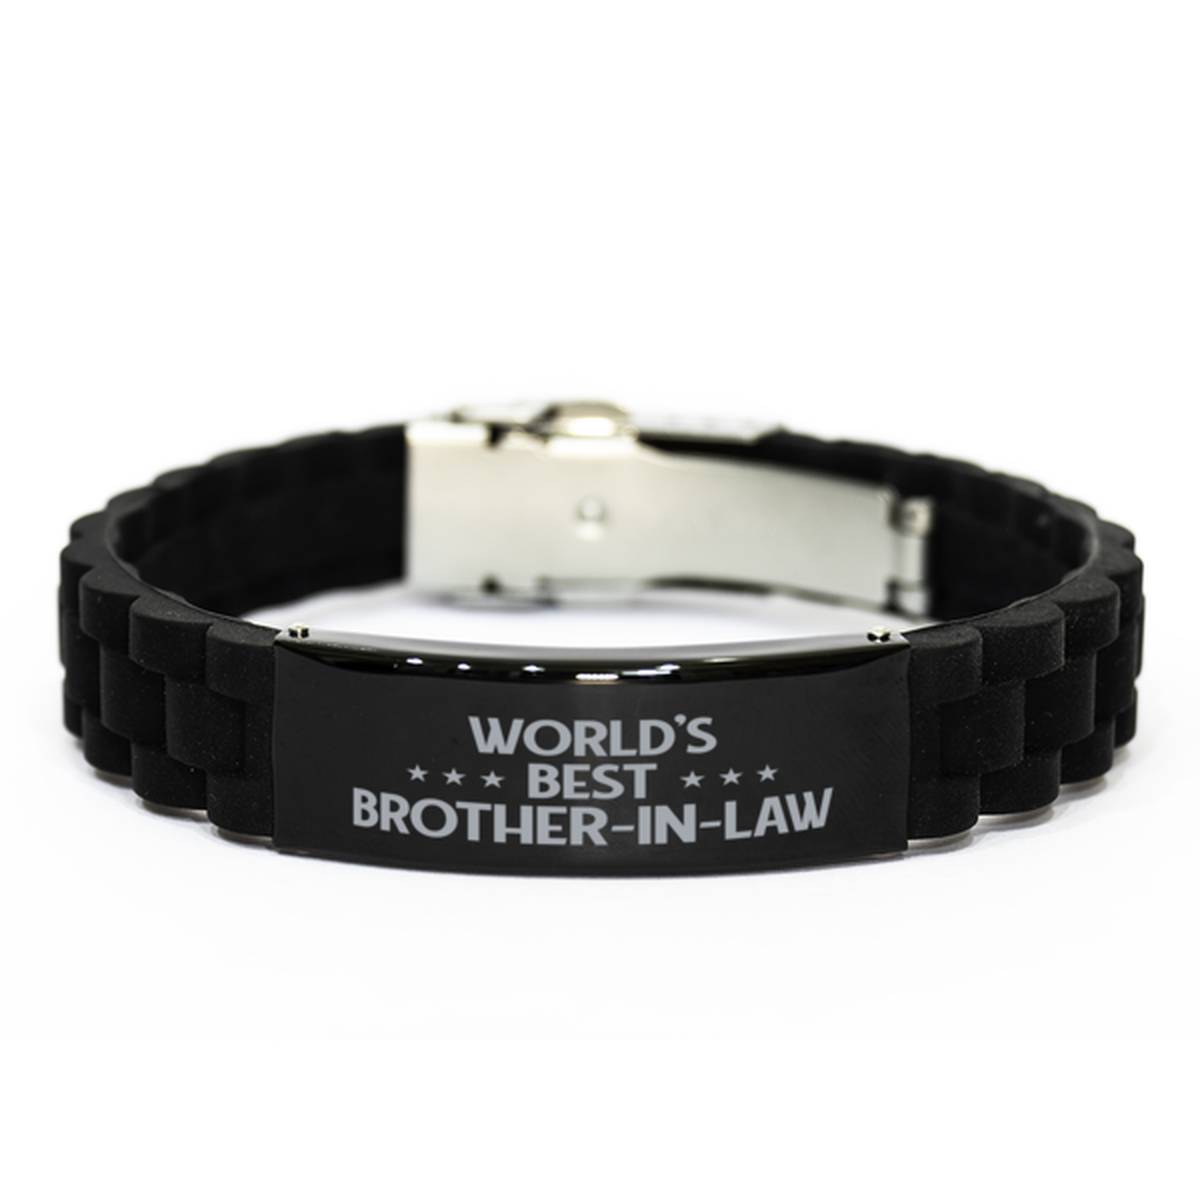 World's Best Brother-in-law Gifts, Funny Black Engraved Bracelet For Brother-in-law, Family Gifts For Men